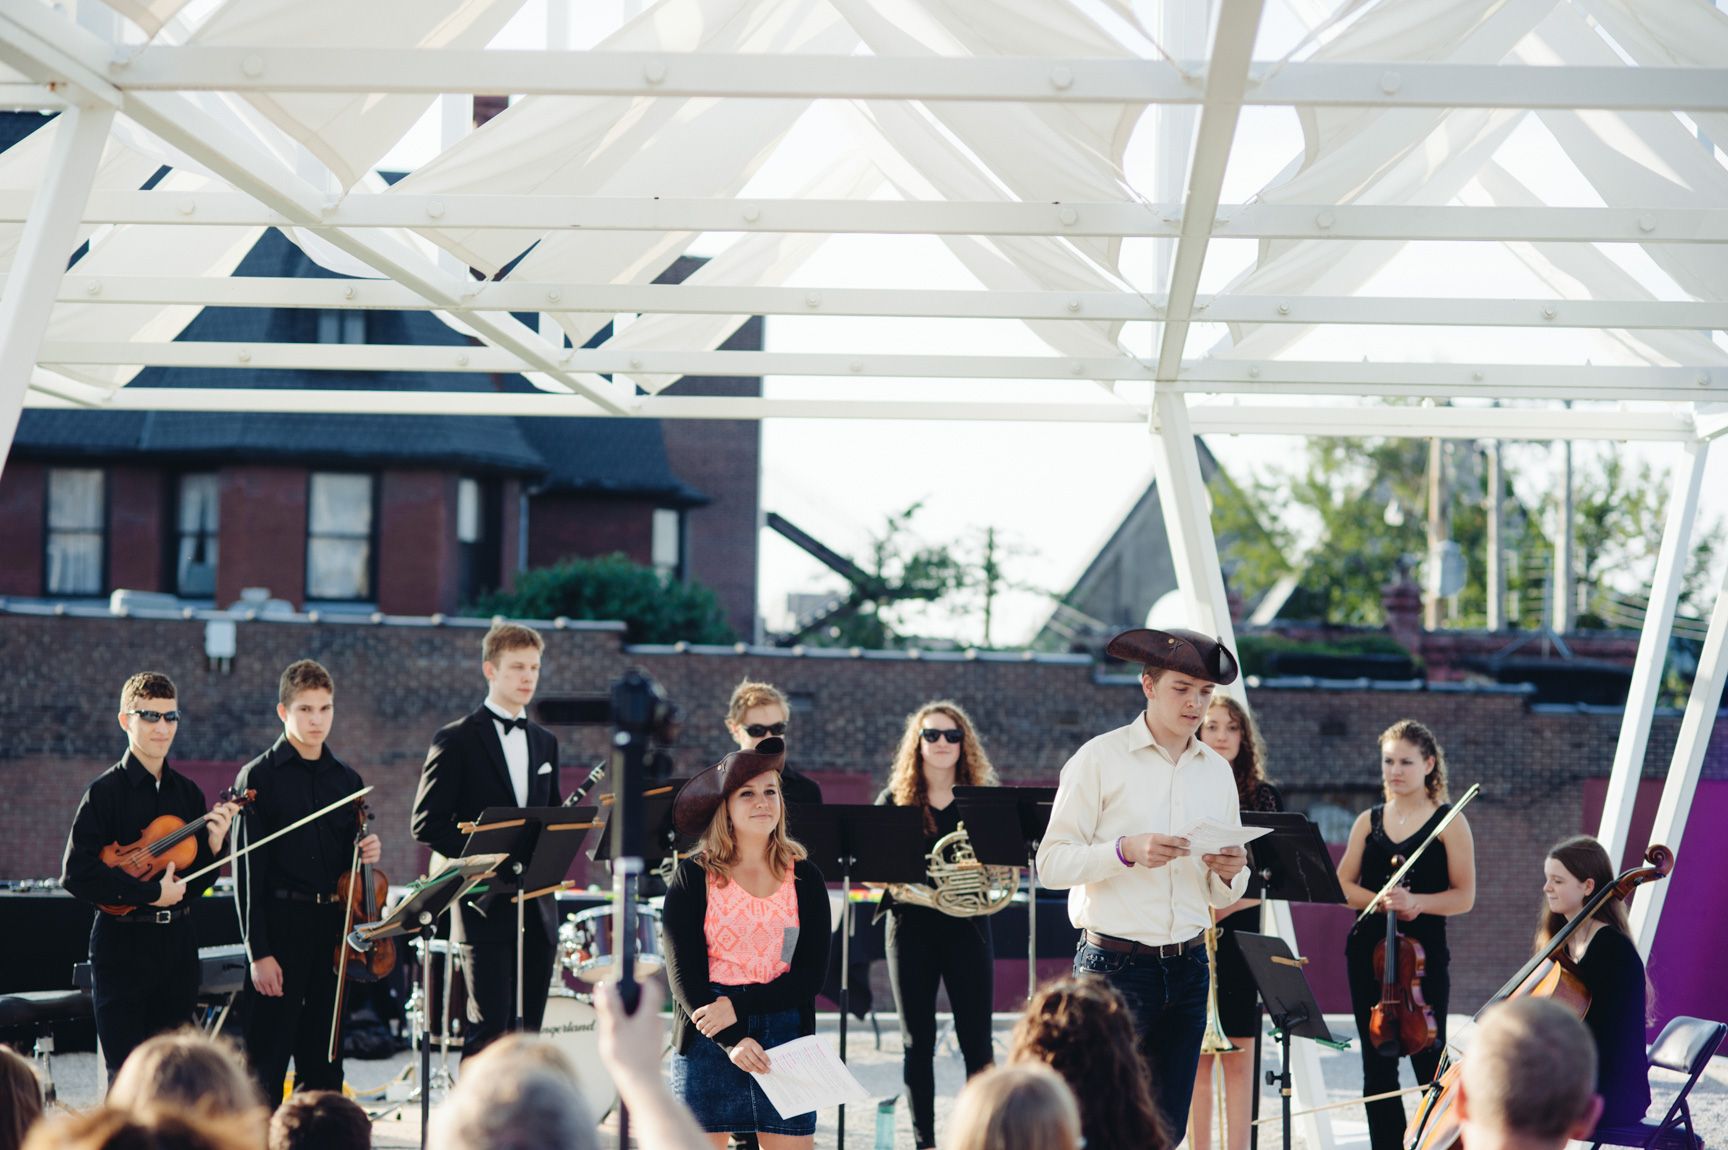 A group of student musicians in formal wear and two others wearing brown hats perform outdoors beneath a white geometric canopy installation for an audience.